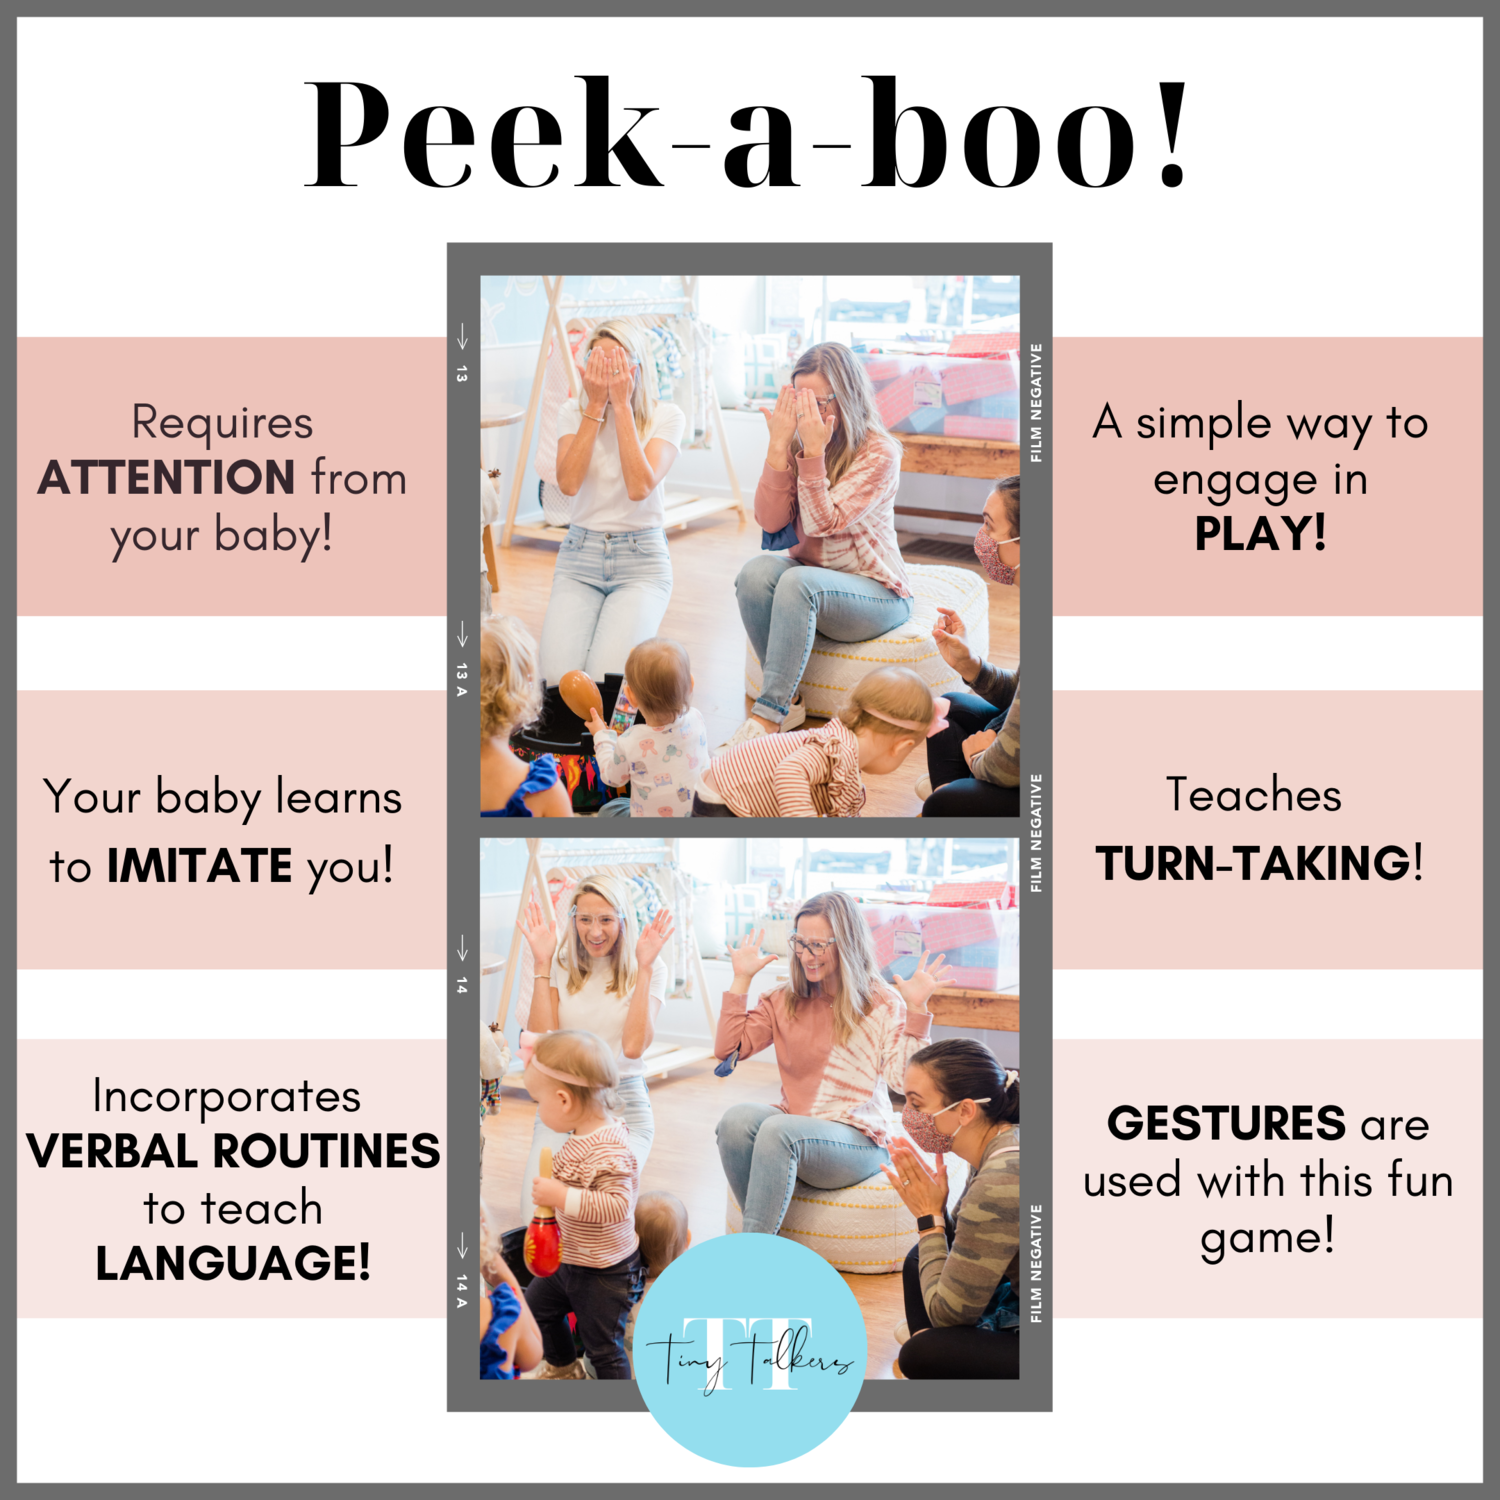 Peek-a-boo! The perfect pre-language game! — Tiny Talkers